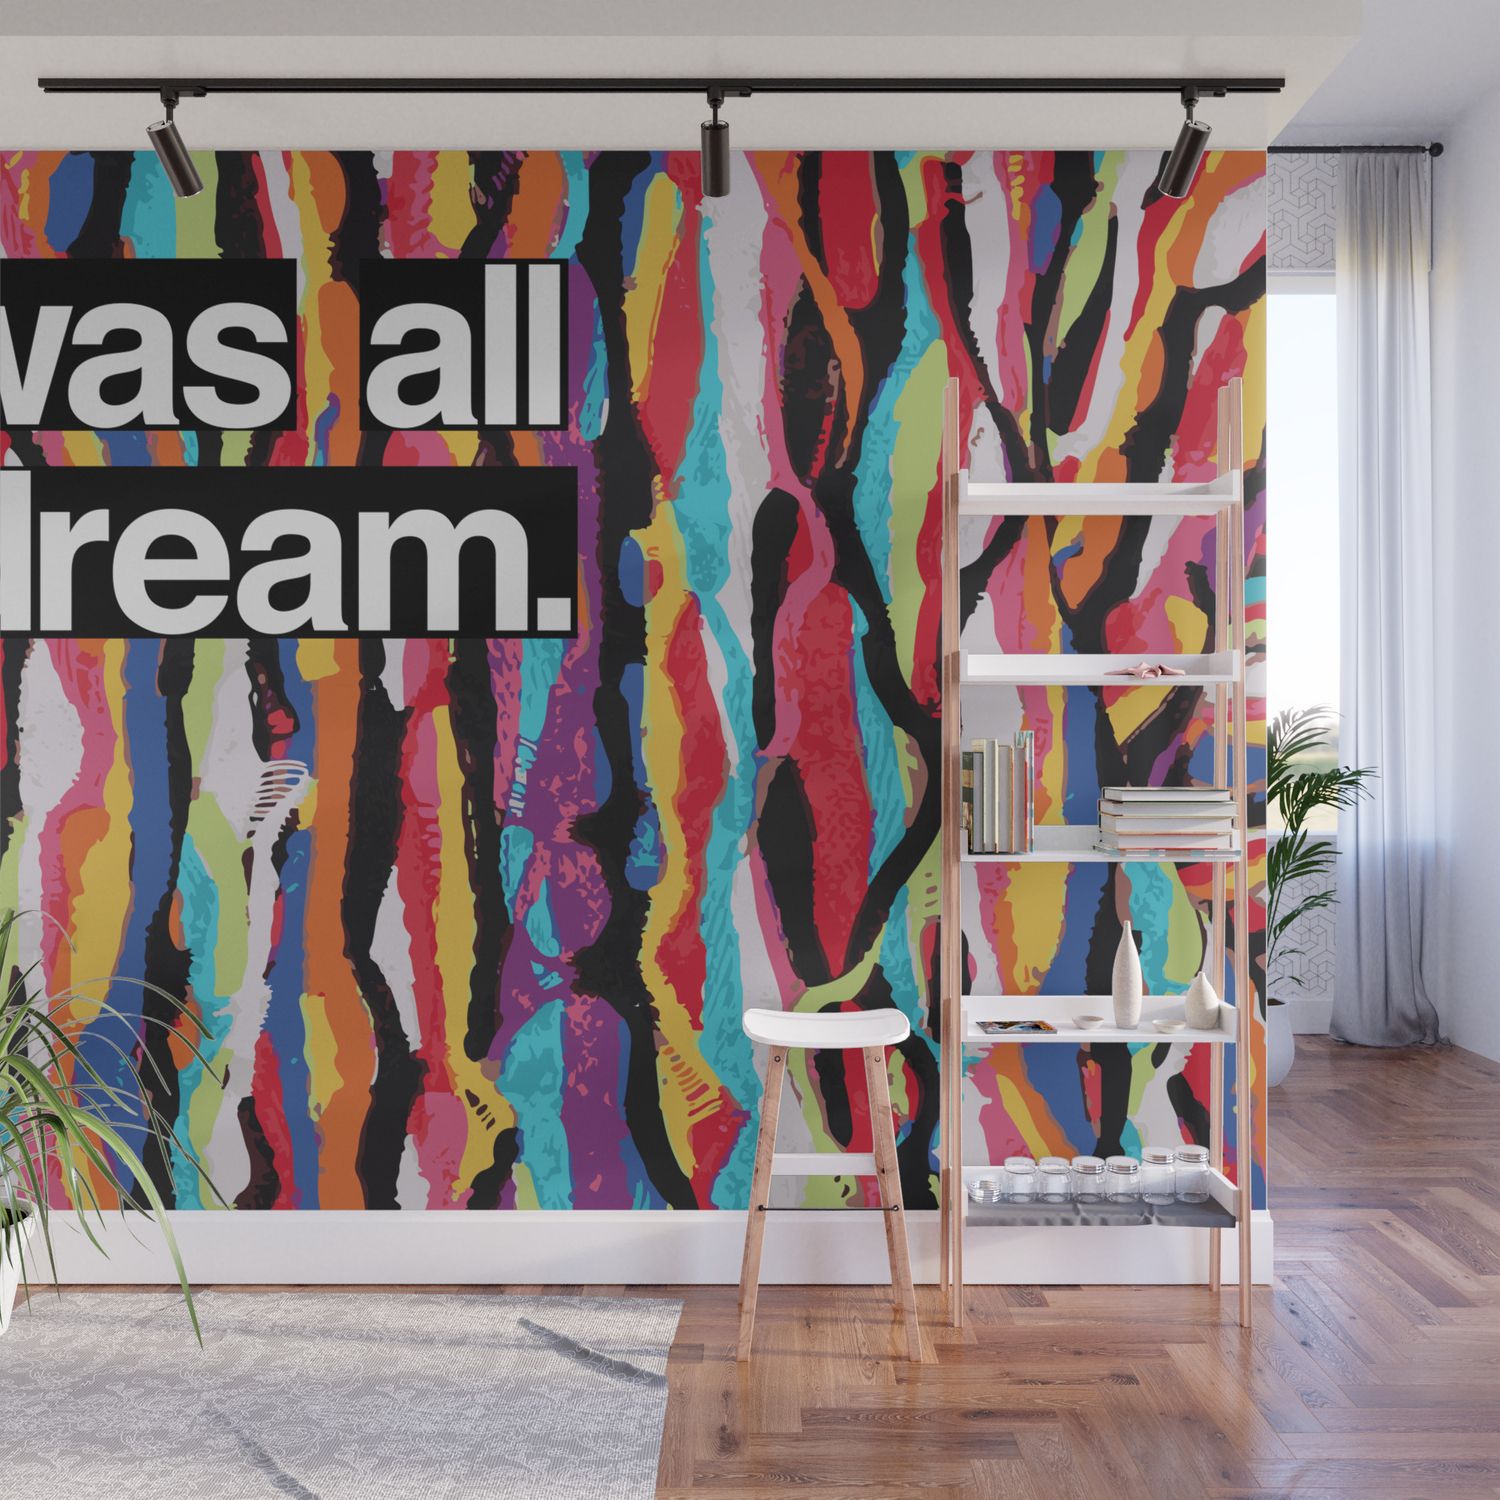 It Was All A Dream" Biggie Small Inspired Hip Hop Design Wall Muralandy  Hendren | Society6 Intended For Hip Hop Design Wall Art (View 10 of 15)